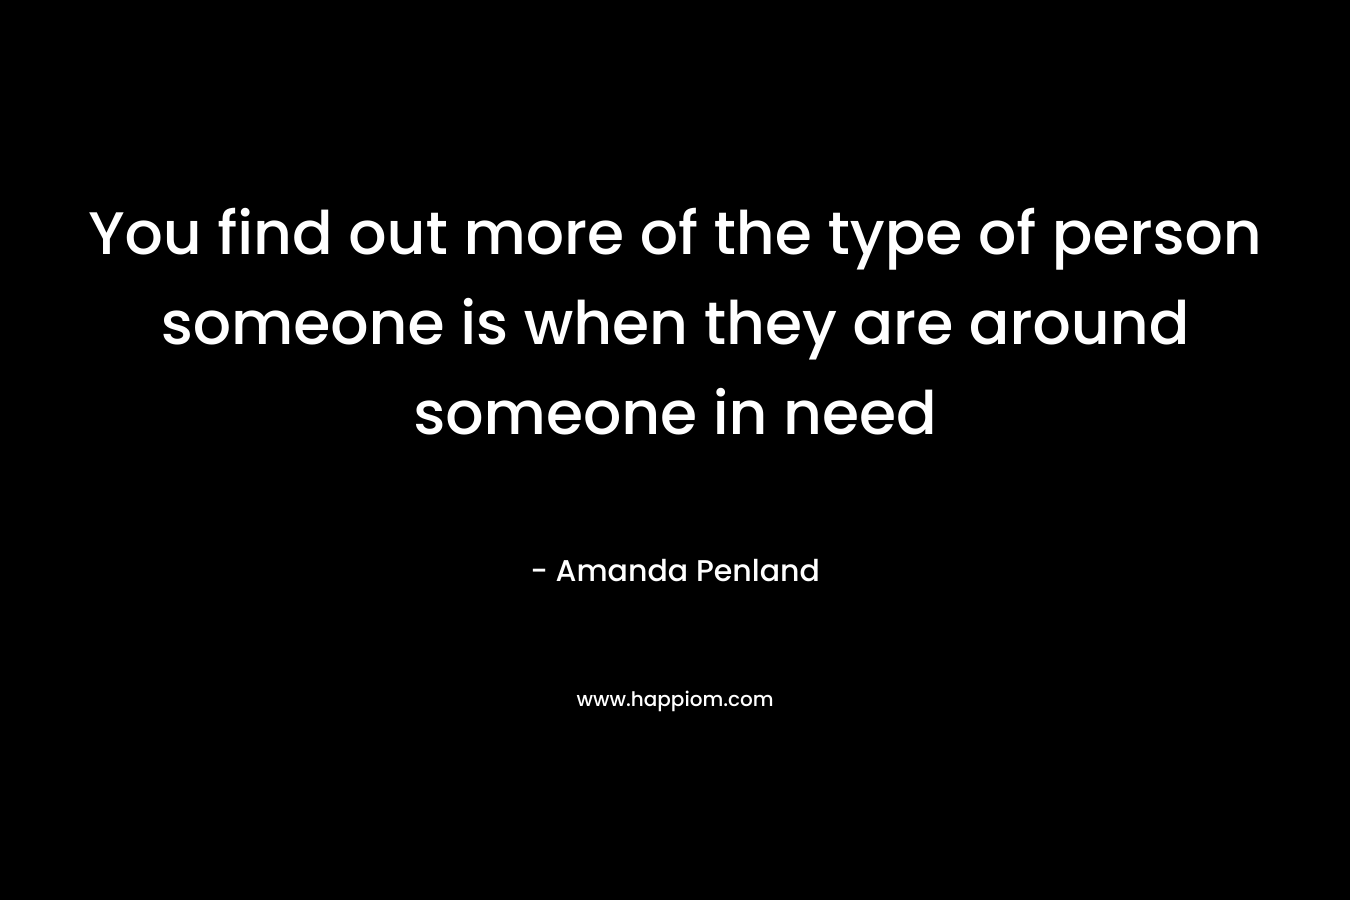 You find out more of the type of person someone is when they are around someone in need – Amanda Penland